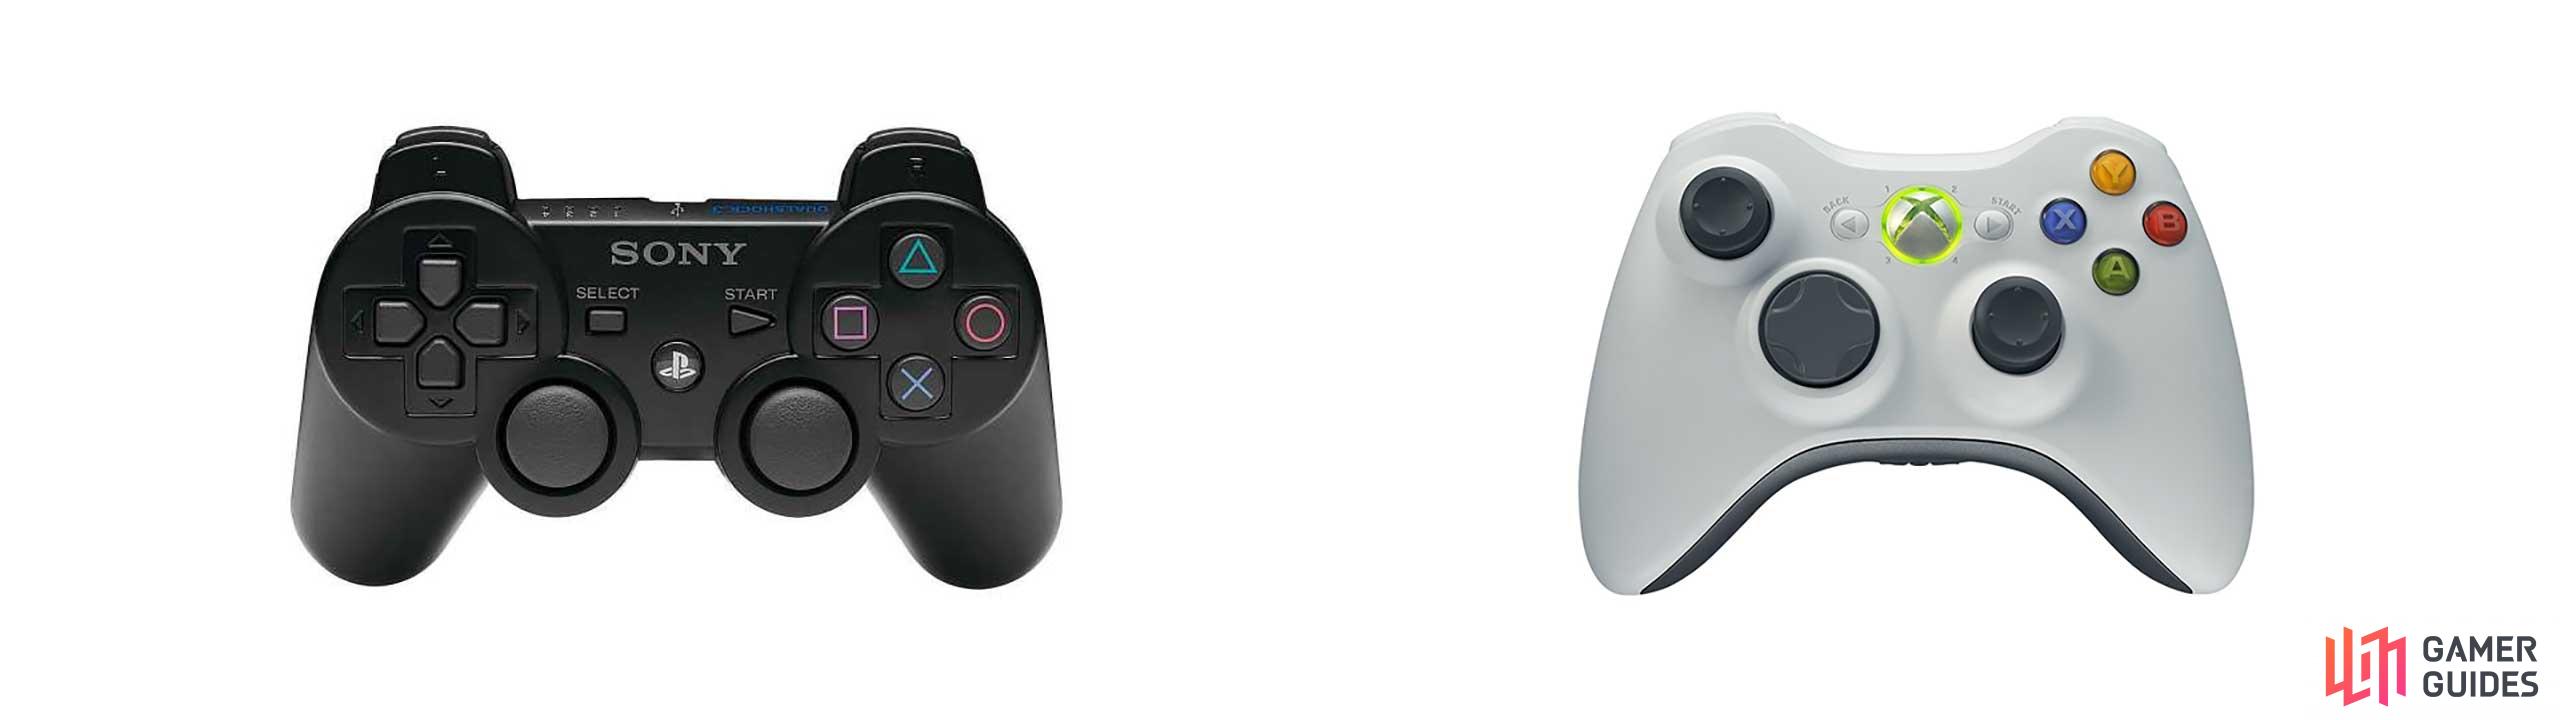 PS3 and Xbox 360 Controls